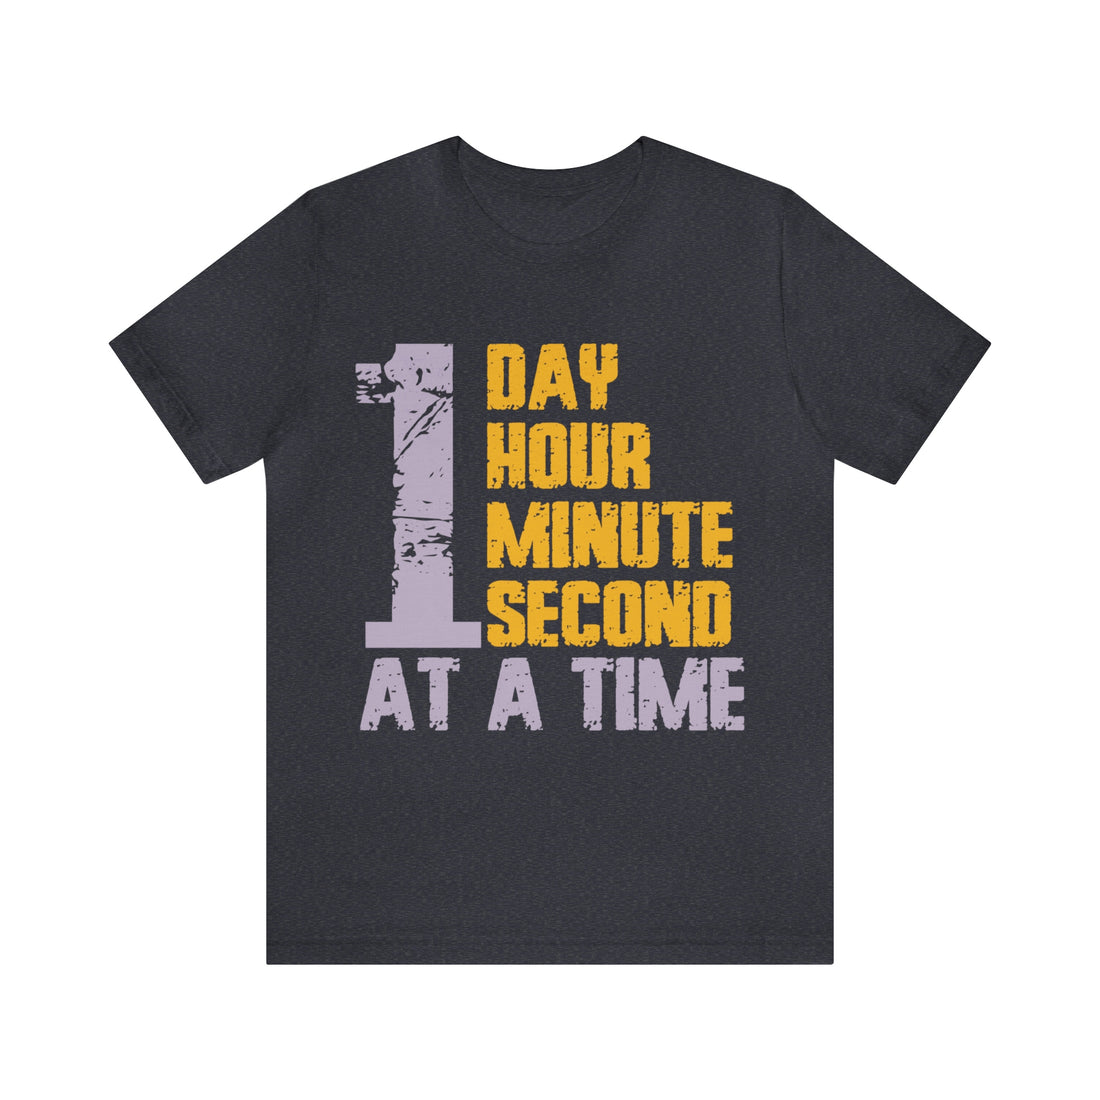 1 Day Hour Minute Second At A Time - Unisex Jersey Short Sleeve Tee